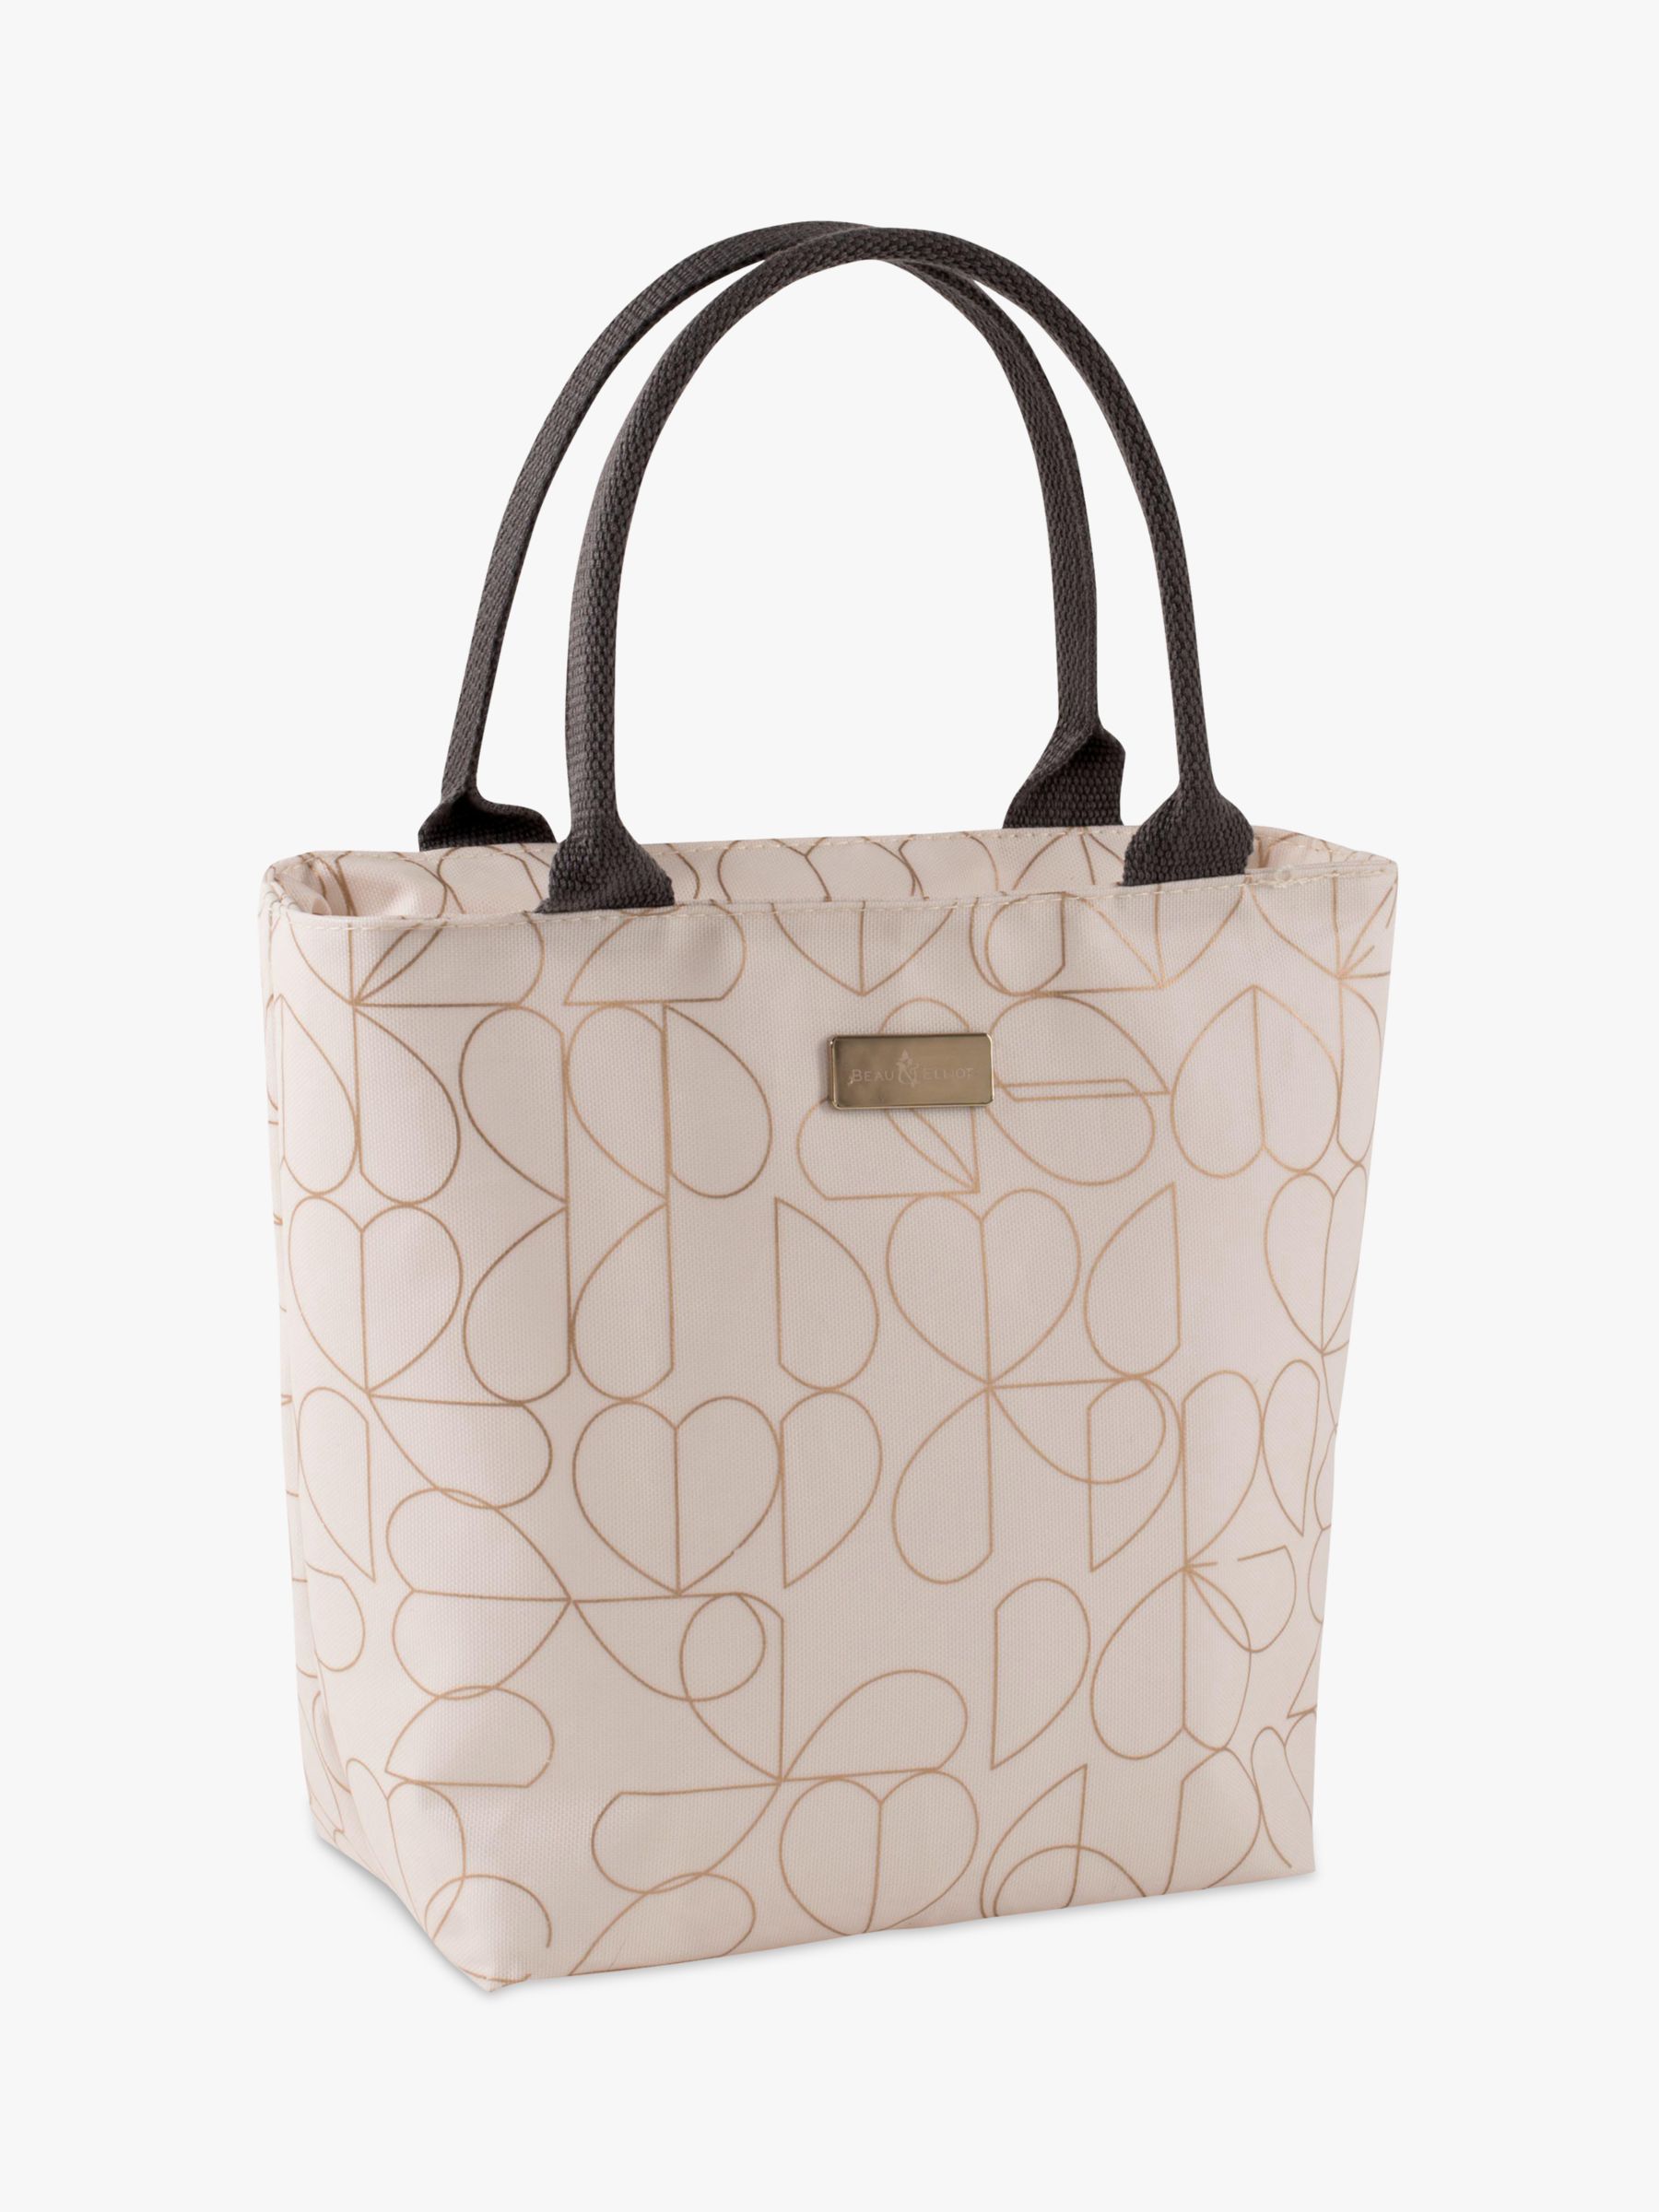 lunch cooler tote bag